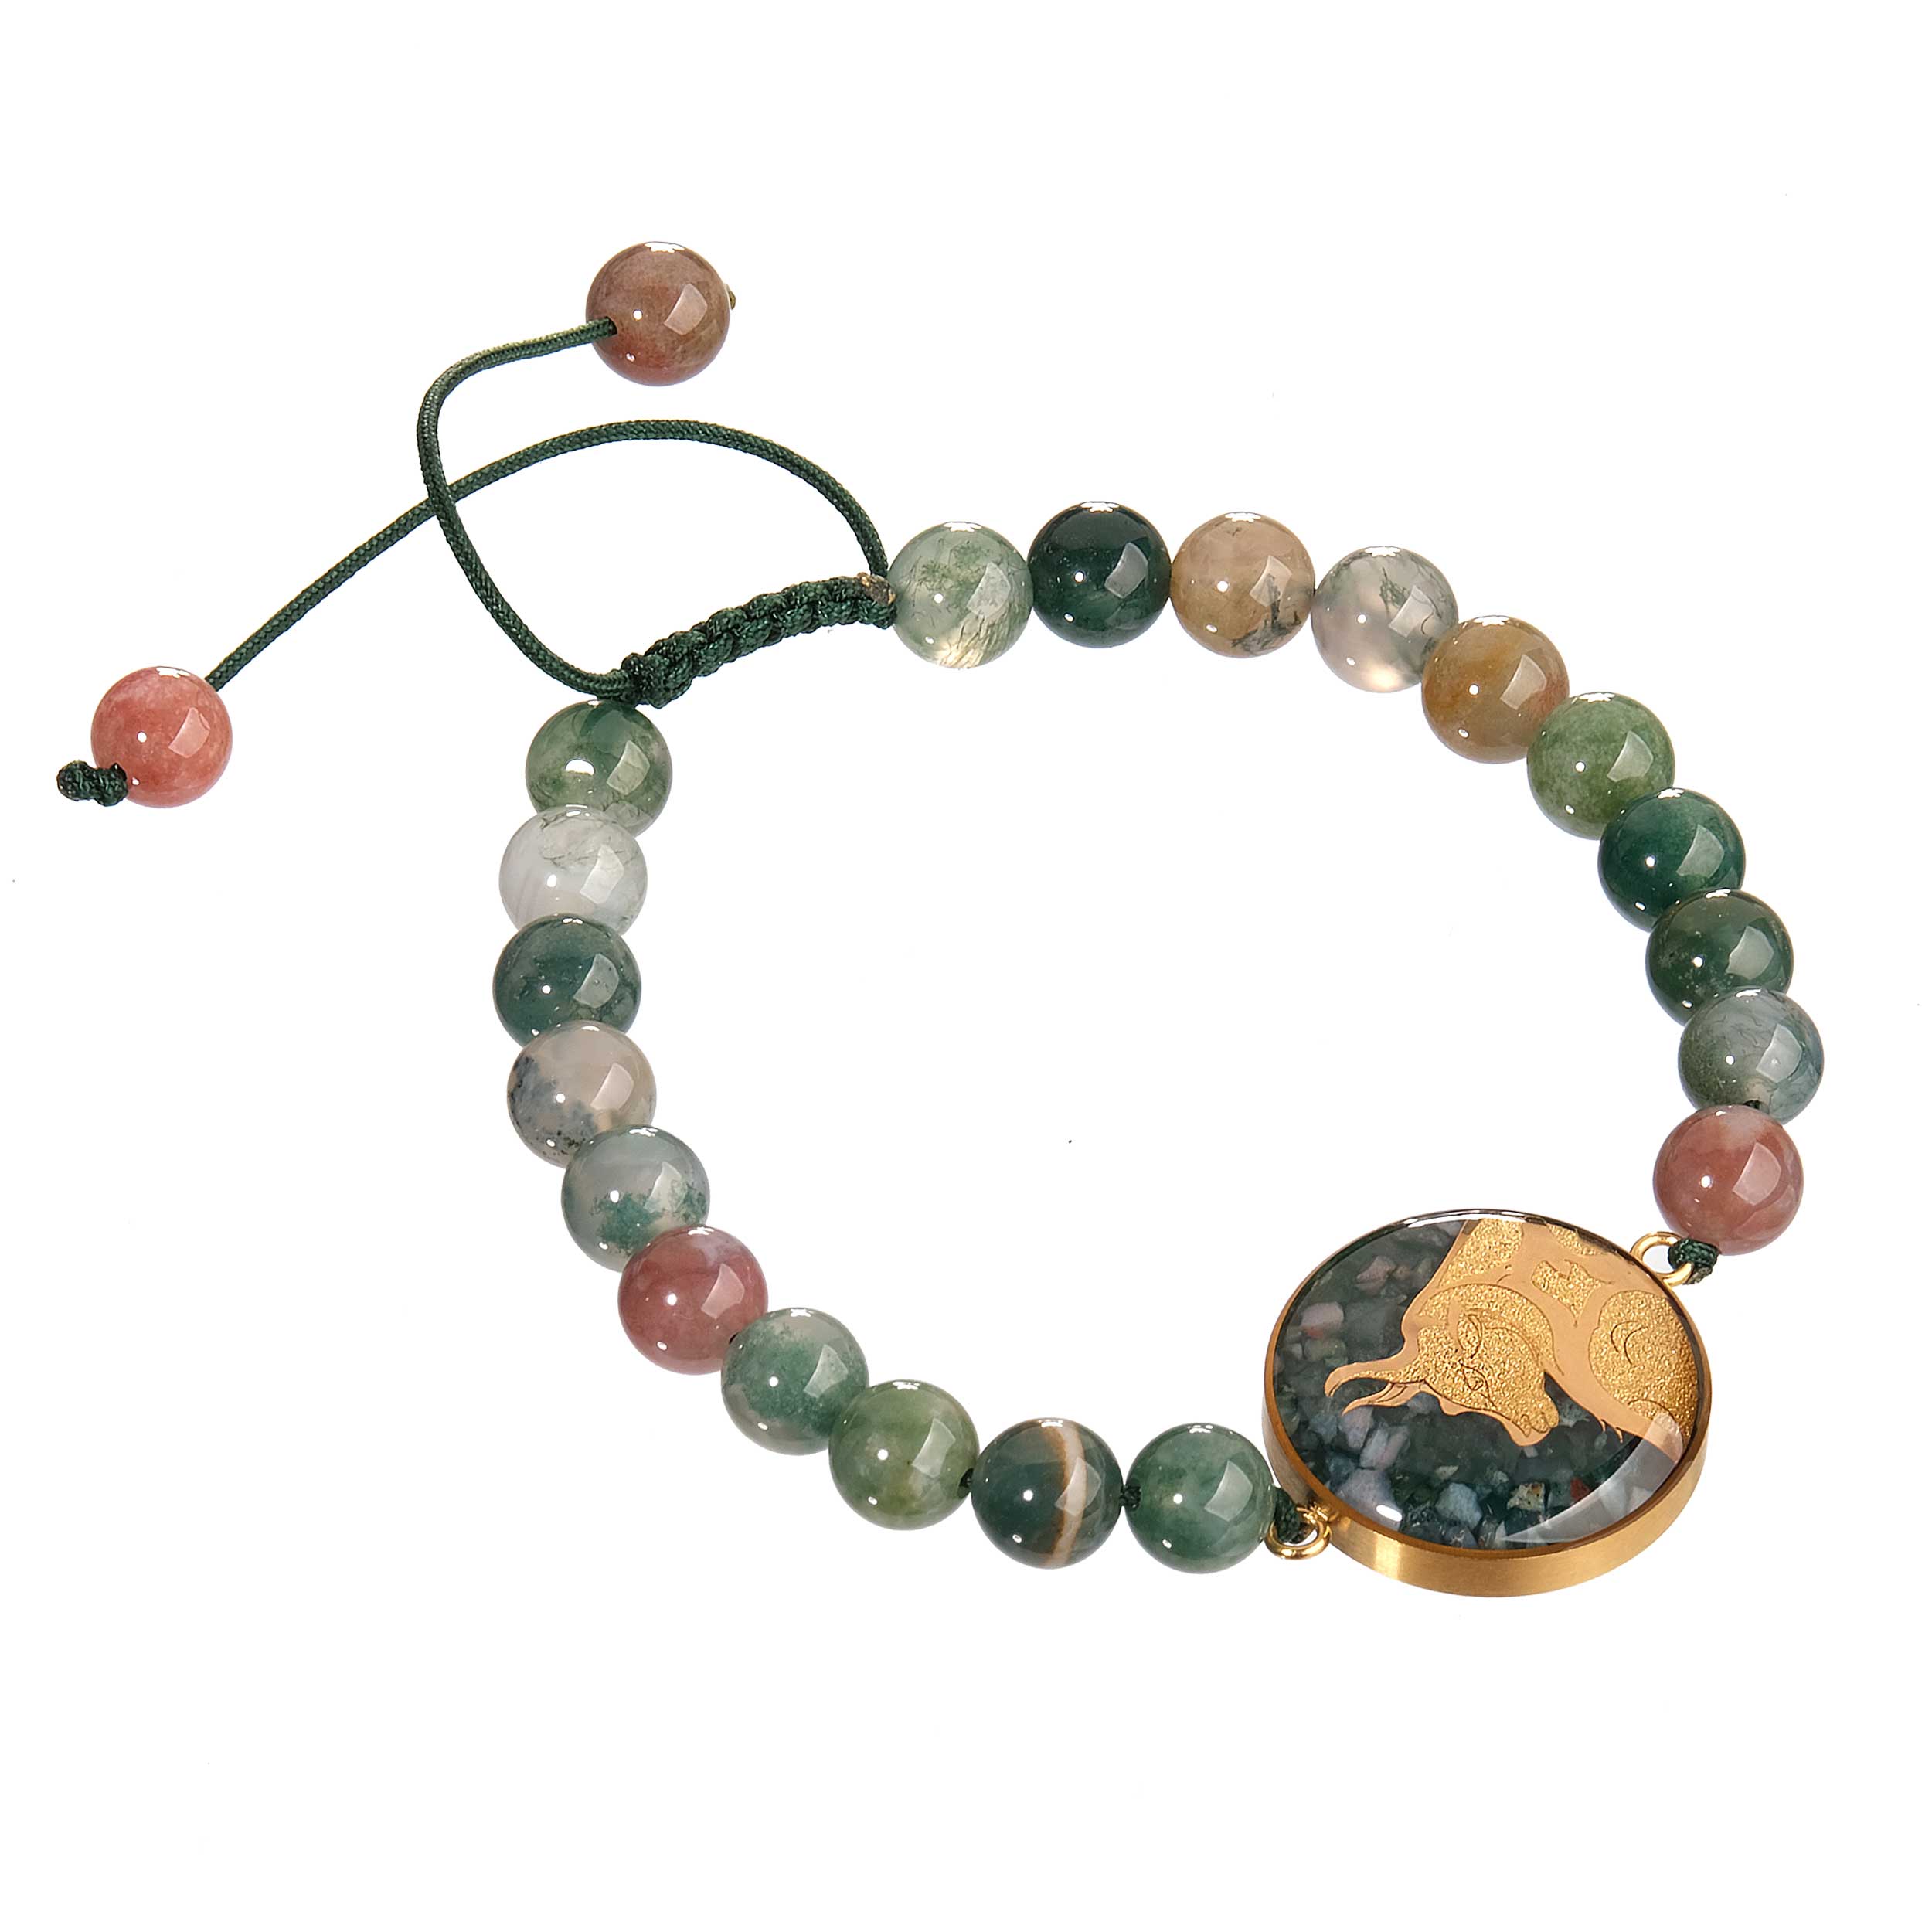 Green agate stone bracelet and 24 carat gold leaf with the symbol design of May